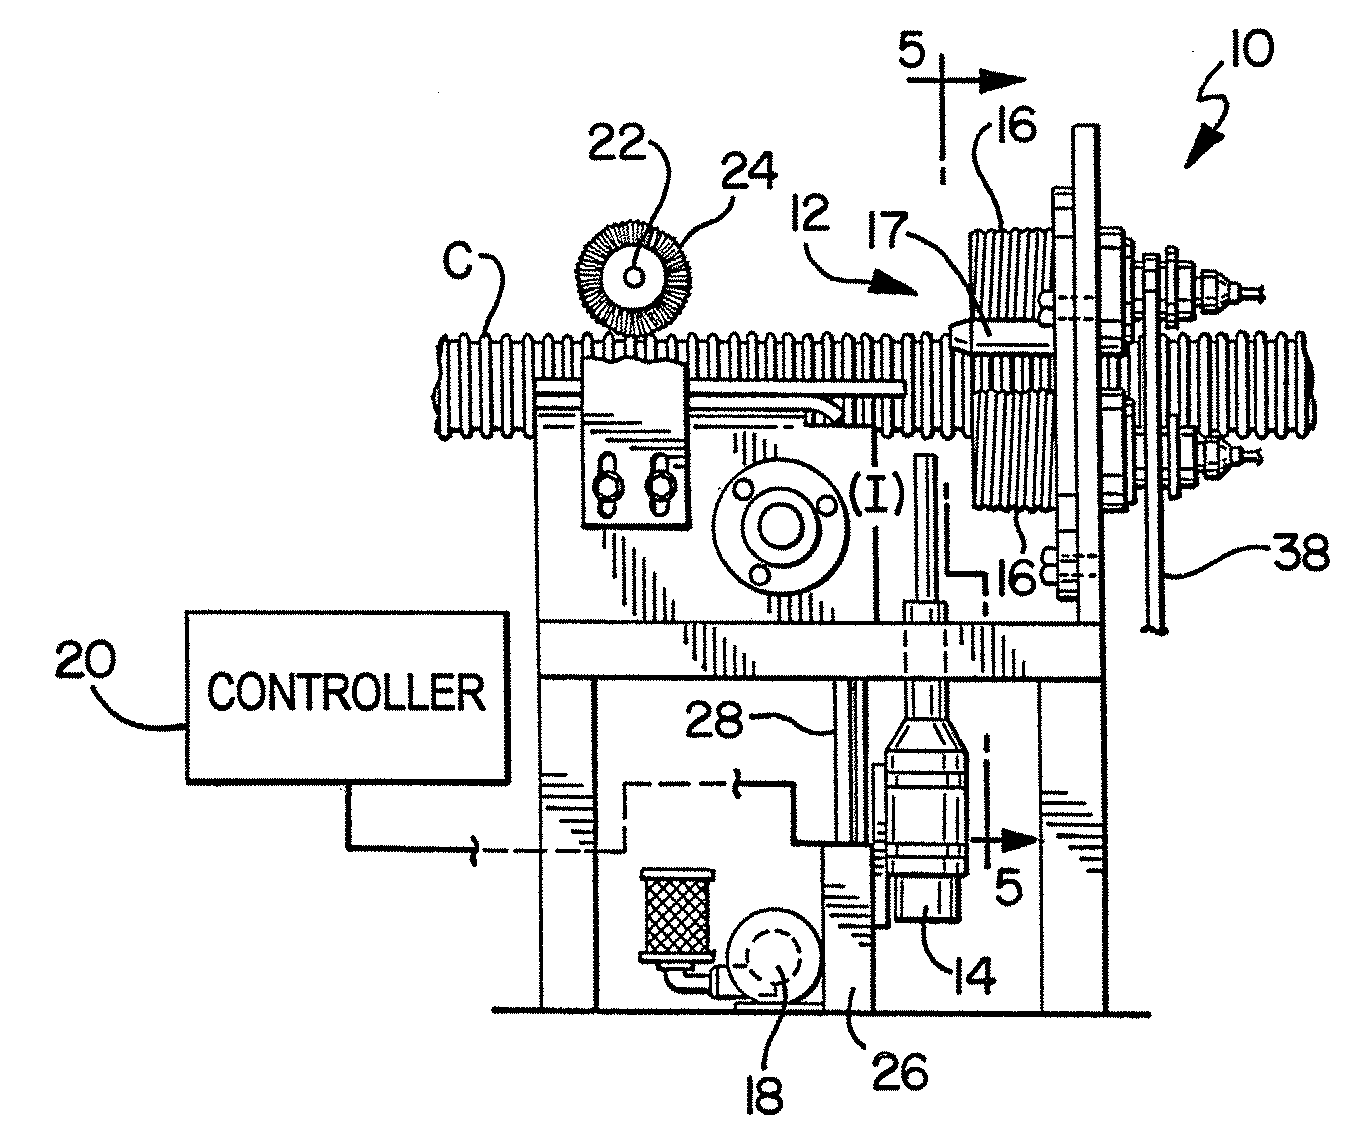 Apparatus for forming rolled lips on thermoplastic containers